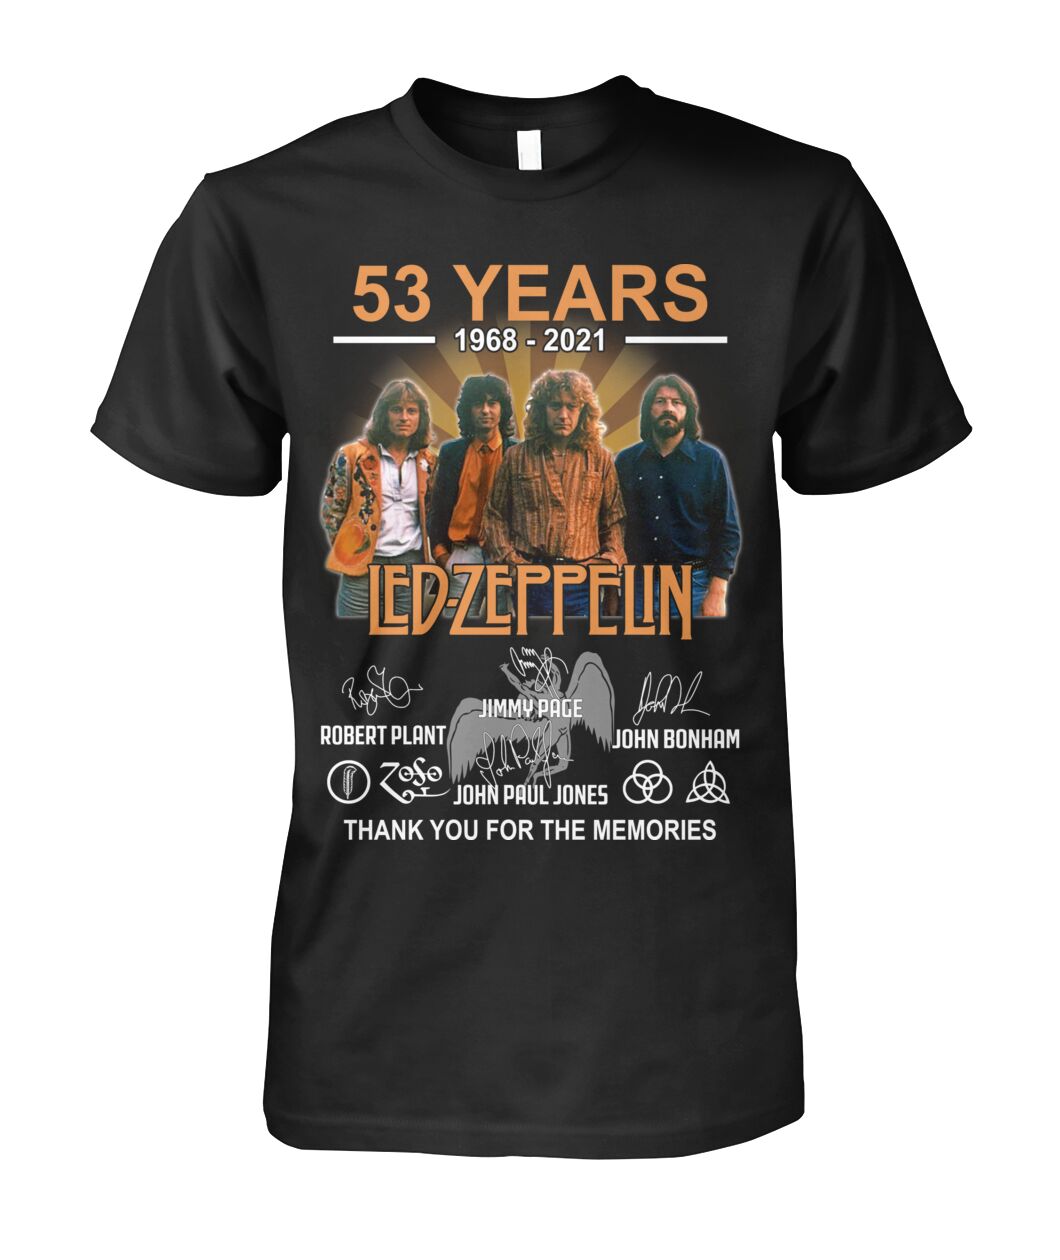 53 years Led Zeppelin signature thank you for the memories shirt